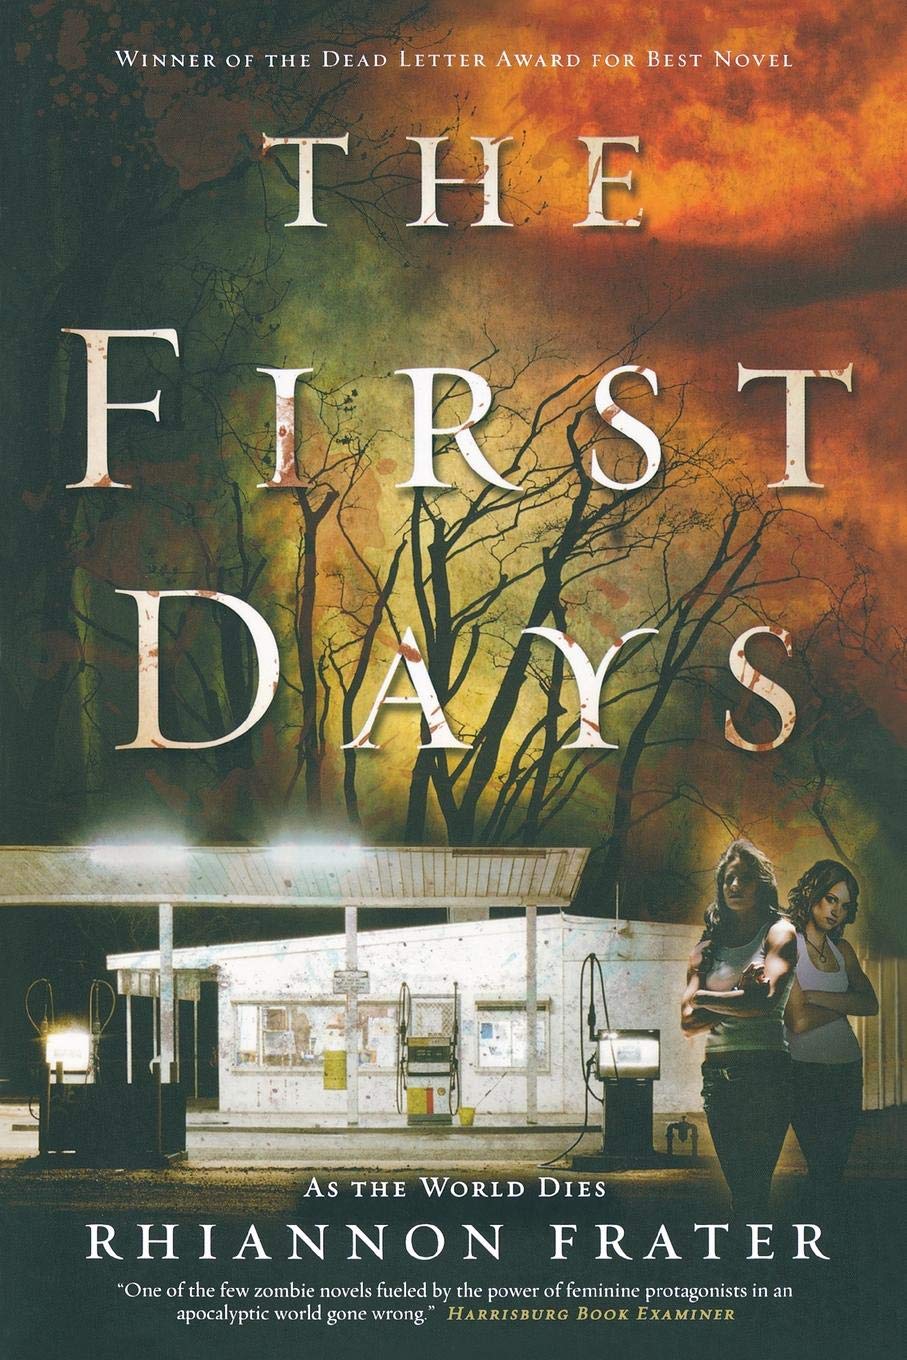 The First Days